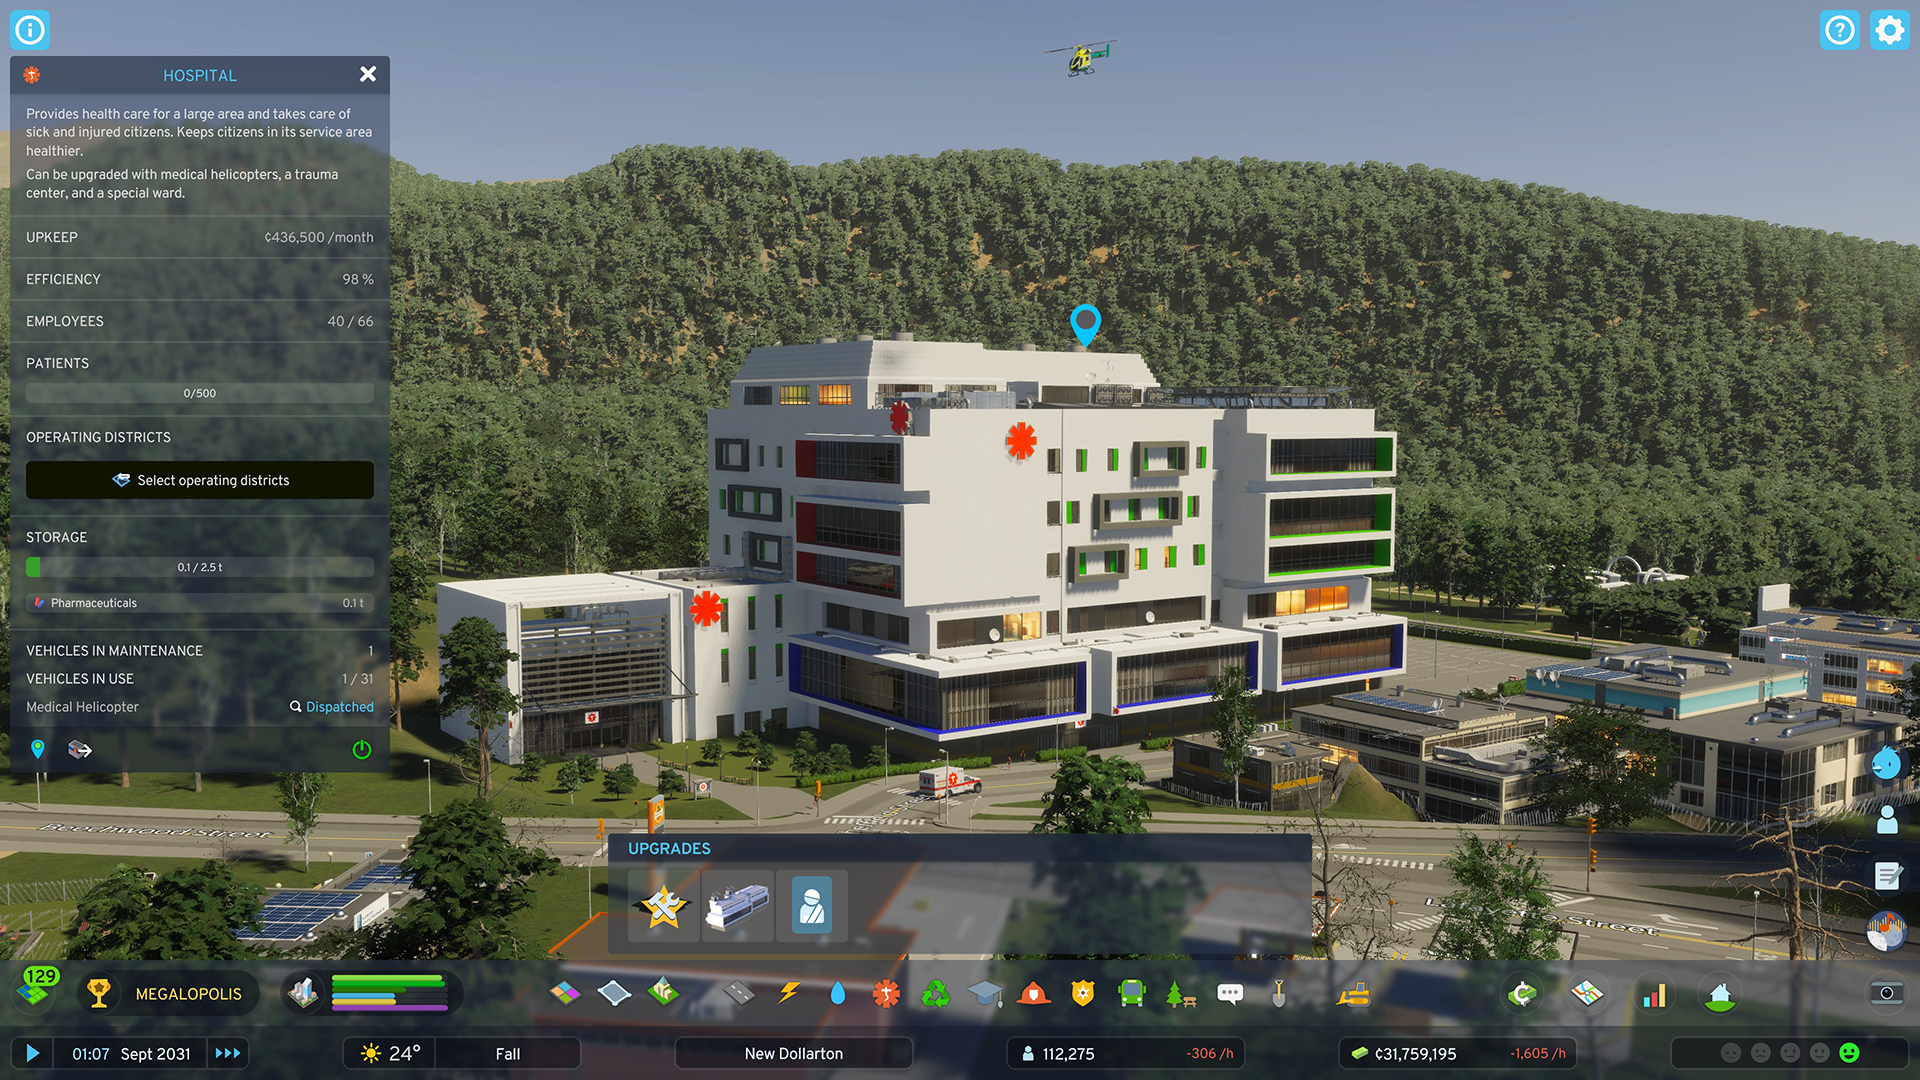 Colossal Order Sets 30fps Target for Cities Skylines 2 Amid Performance  Concerns